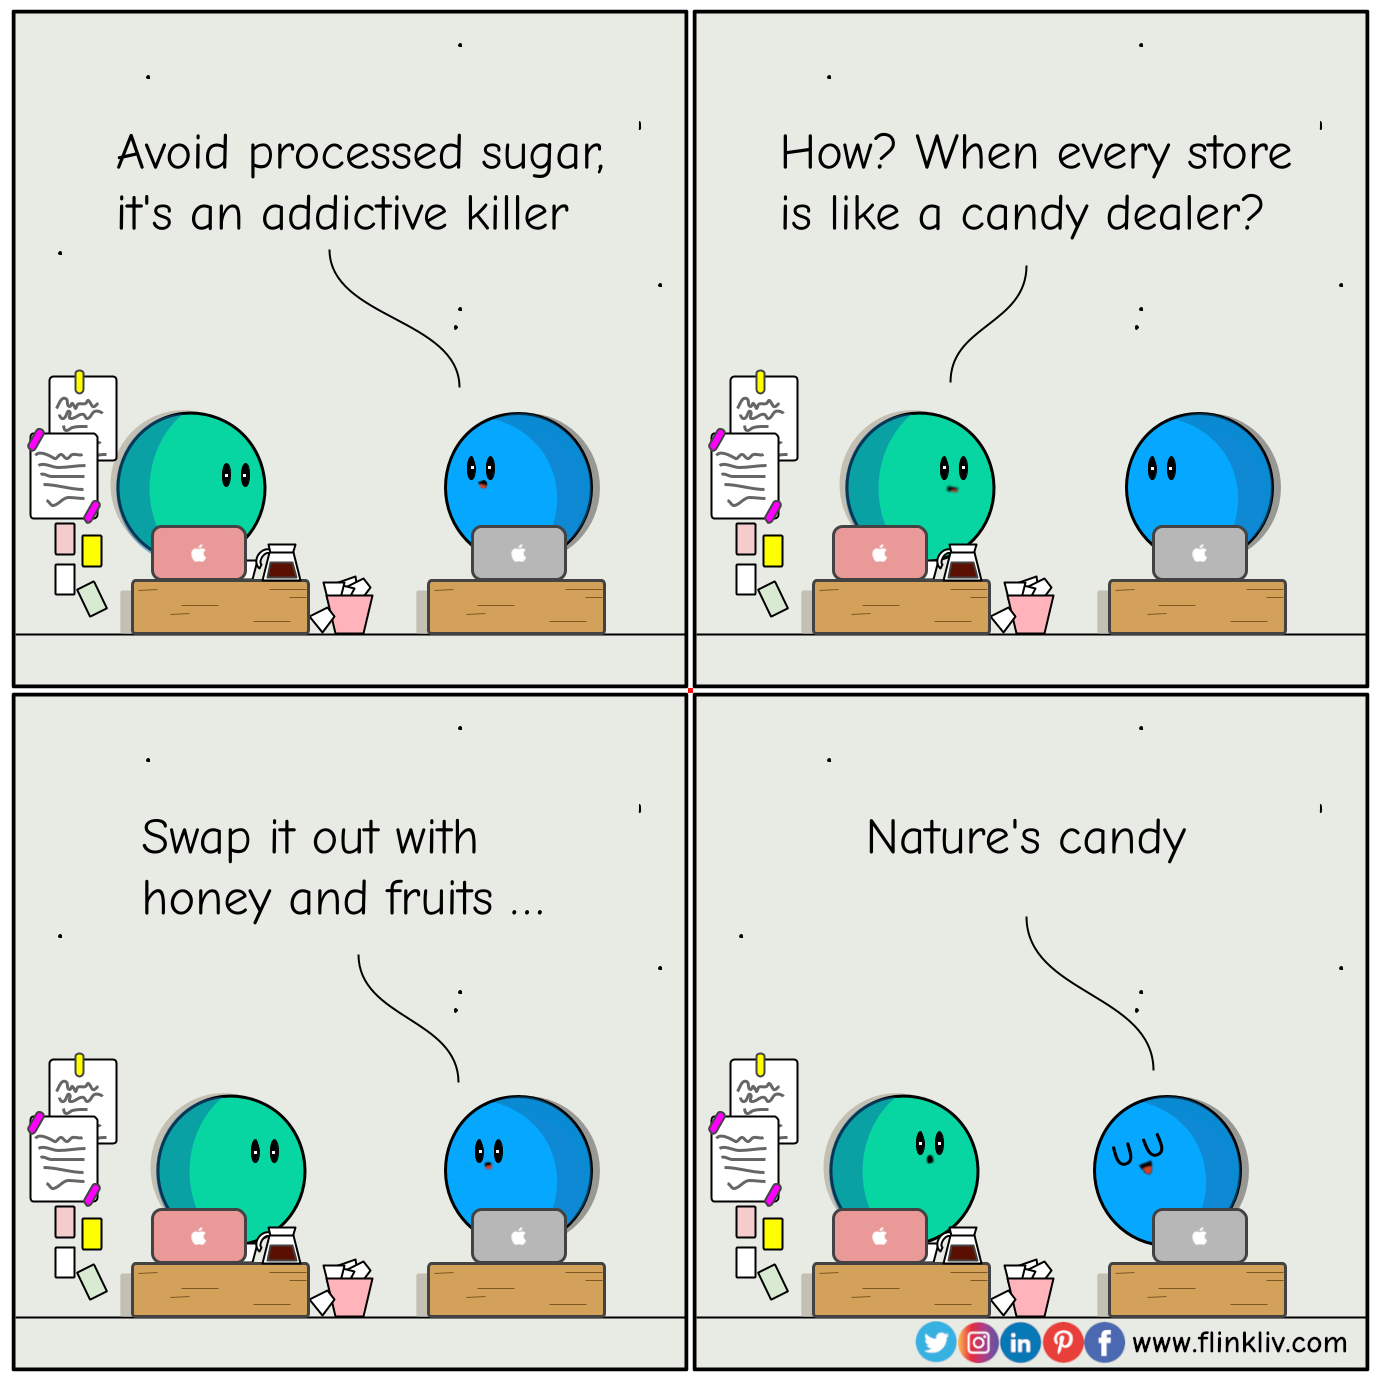 Conversation between A and B about how the processed sugar is the addictive killer. B: Watch out! Sugar's the addictive killer A: How? when every store is like a candy dealer? B: swap it out with honey and fruits B: Nature's candy By flinkliv.com